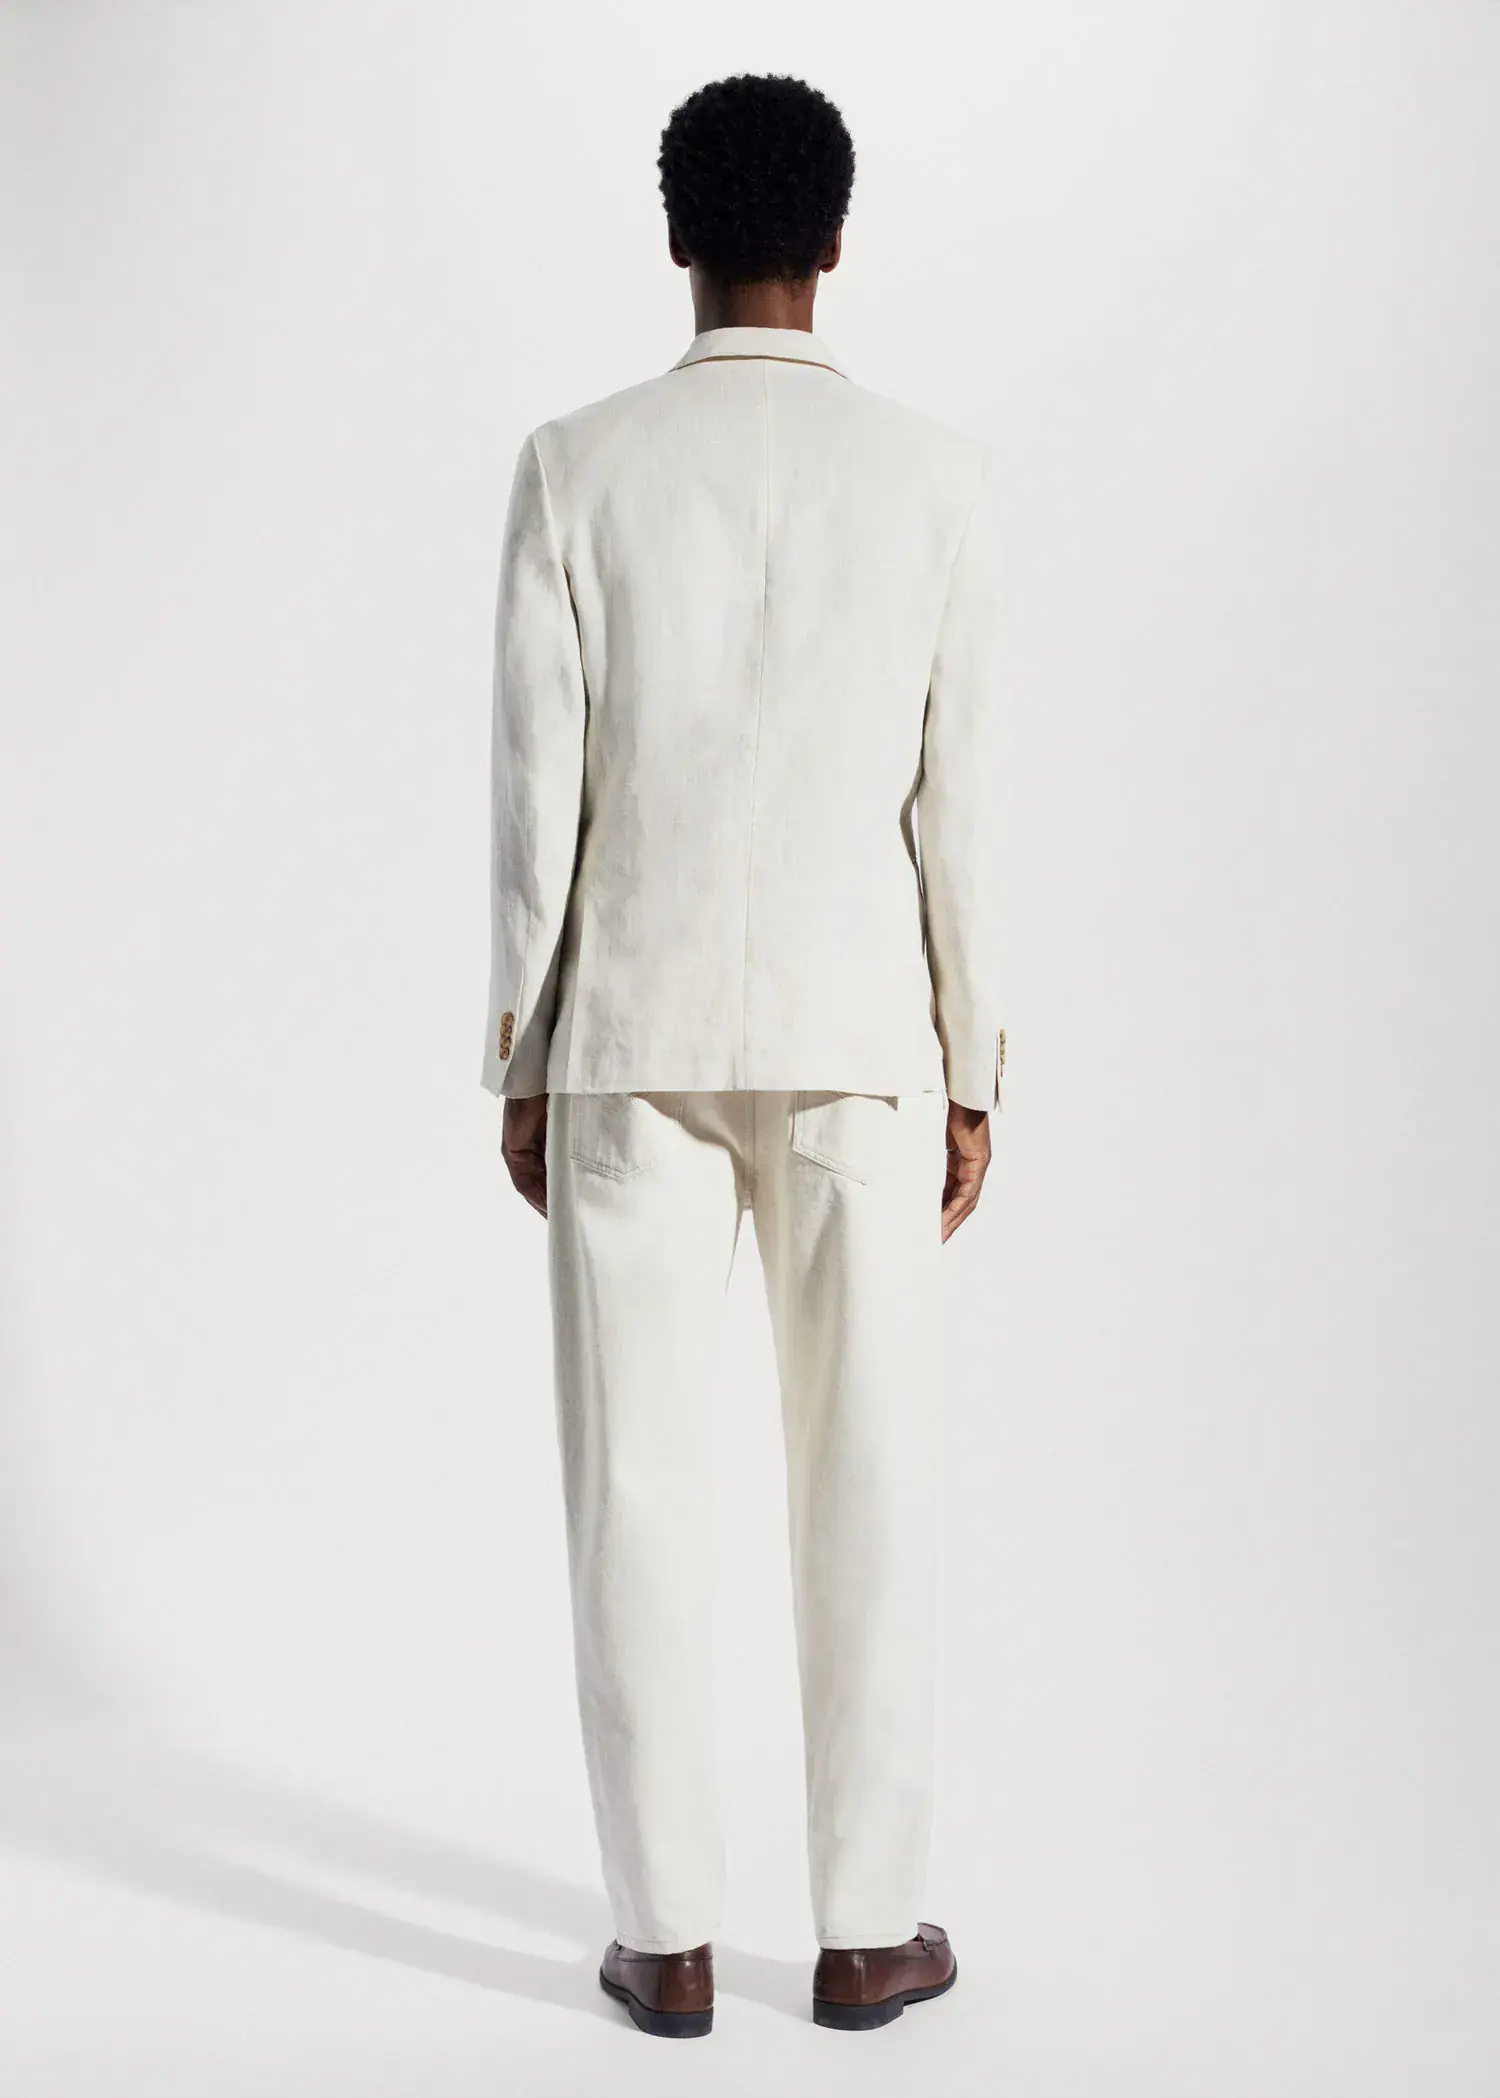 Mango 100% linen slim fit blazer. a man in a white suit standing in front of a white wall. 